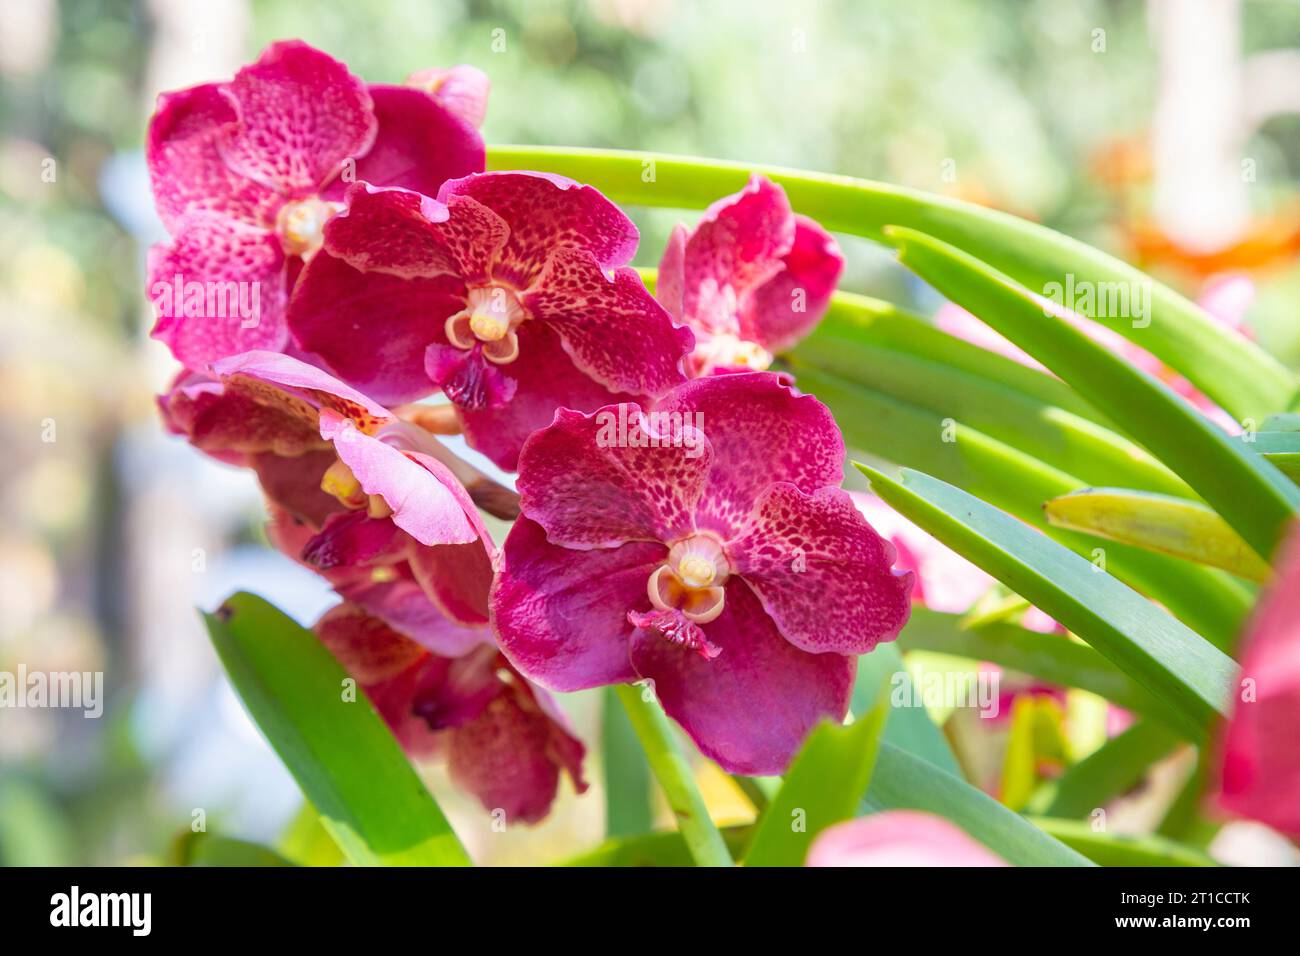 Beautiful vanda orchid flower photographed in the garden. Stock Photo